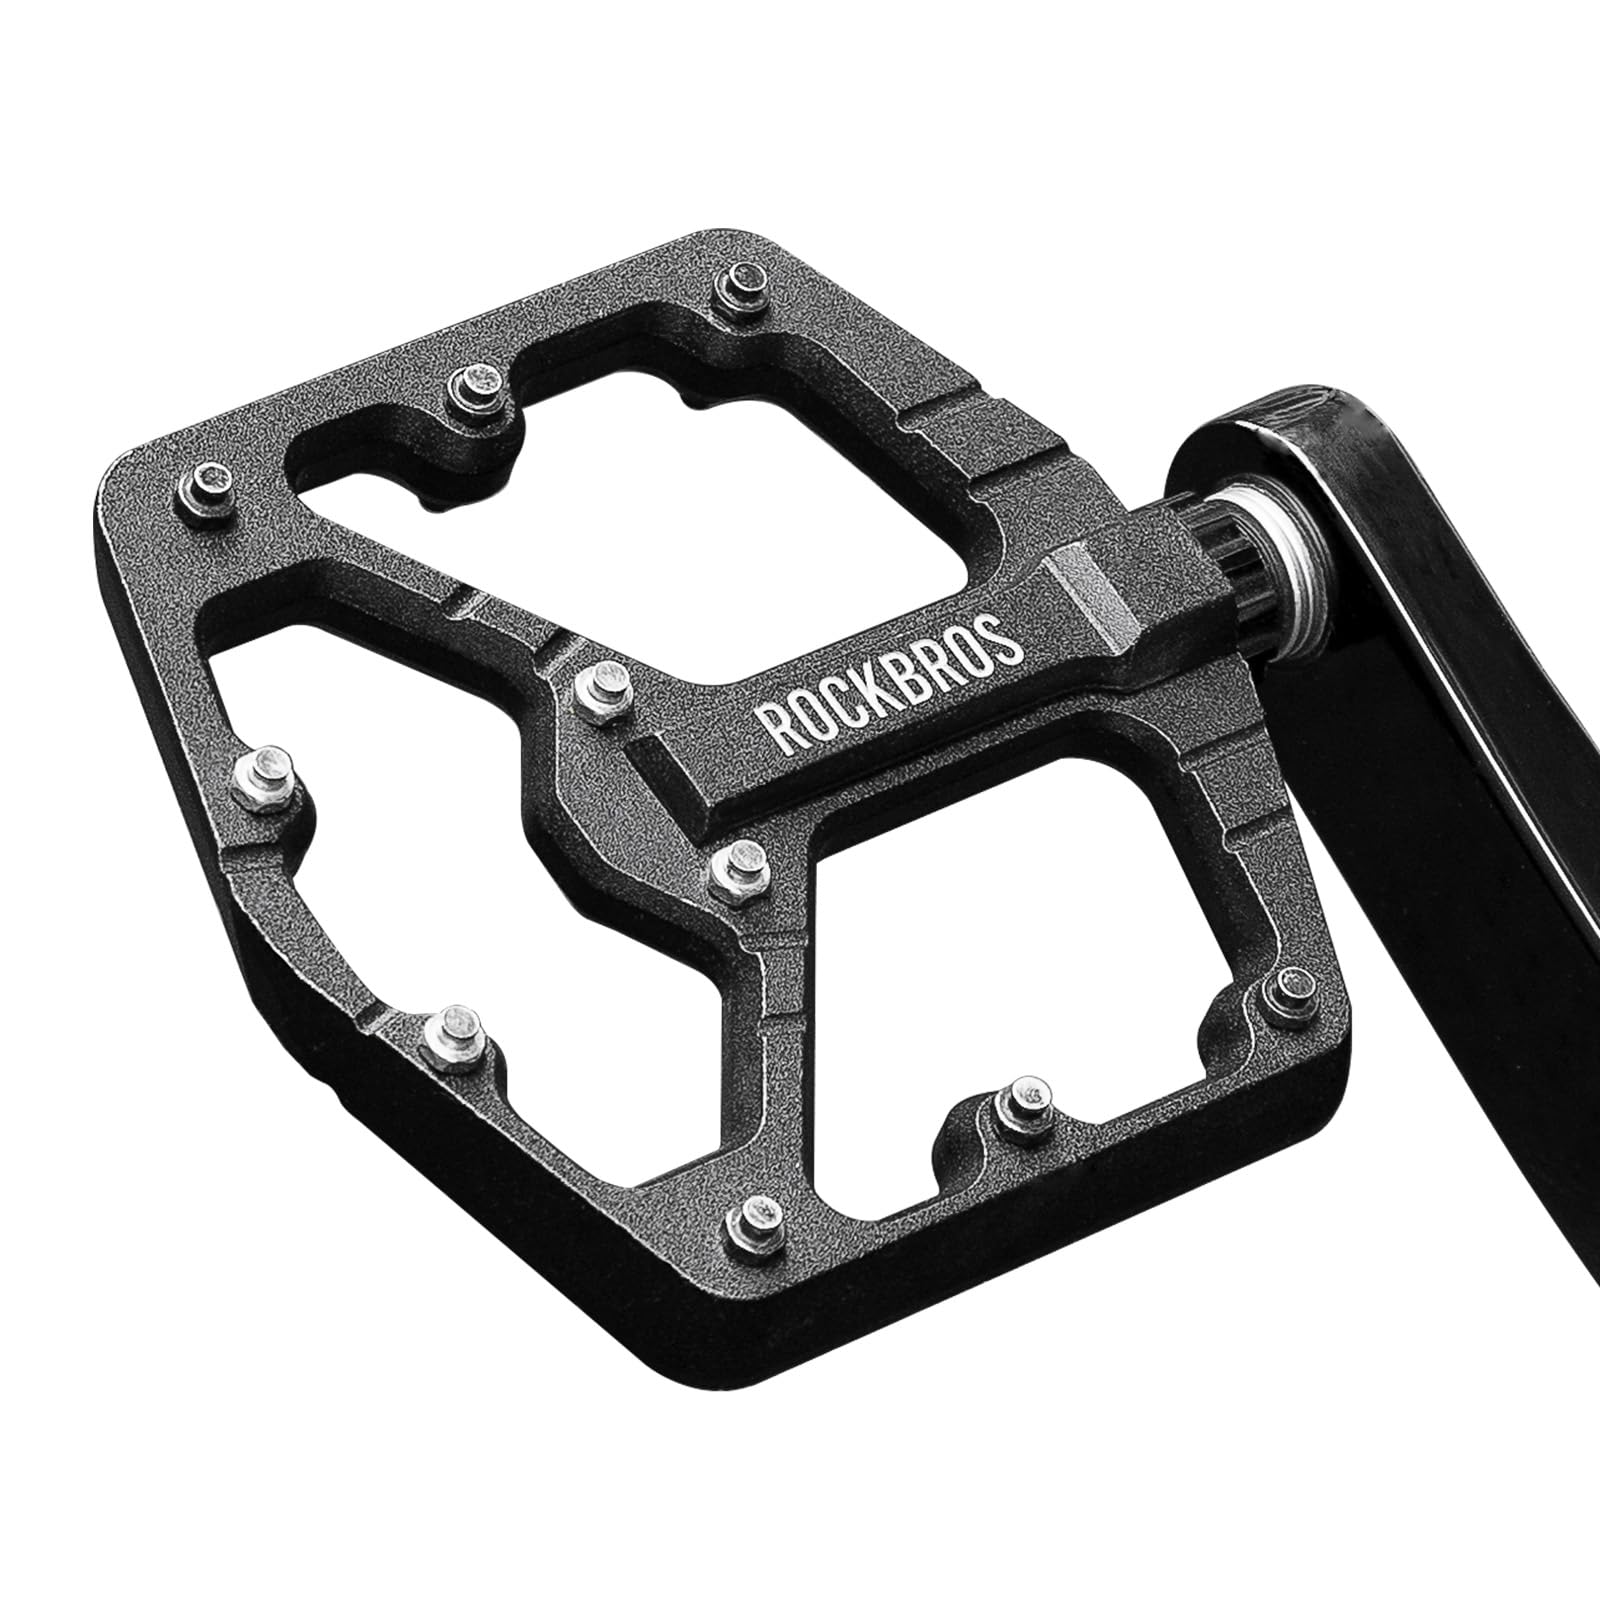 ROCKBROS Road-to-Sky Bicycle Pedals 9/16 Inch Aluminum Alloy Non-Slip